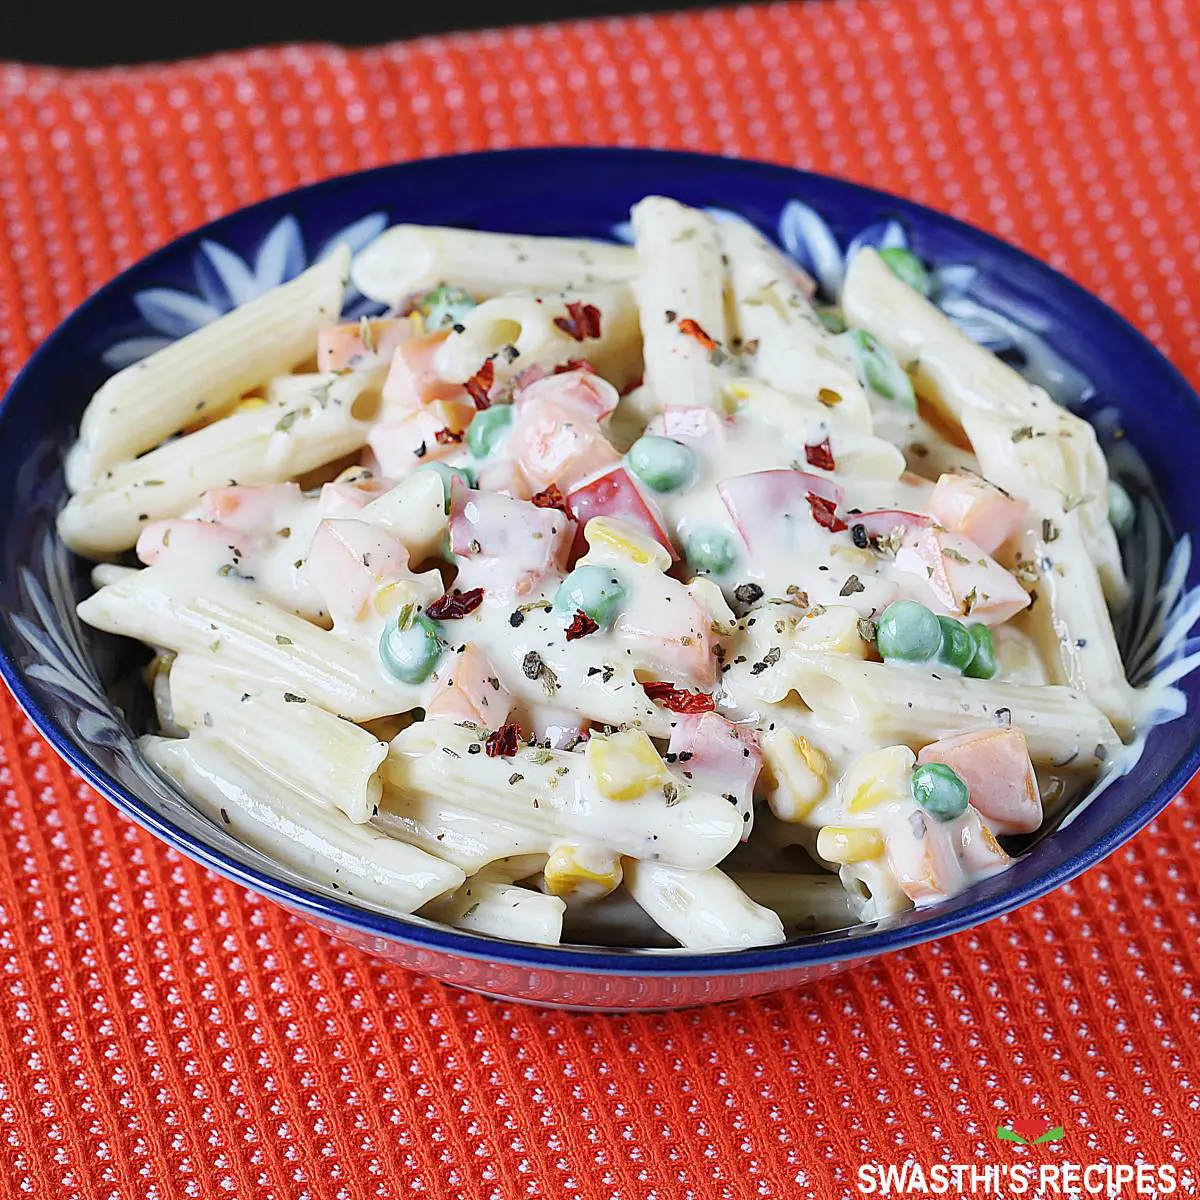 White sauce pasta with penne, milk and veggies